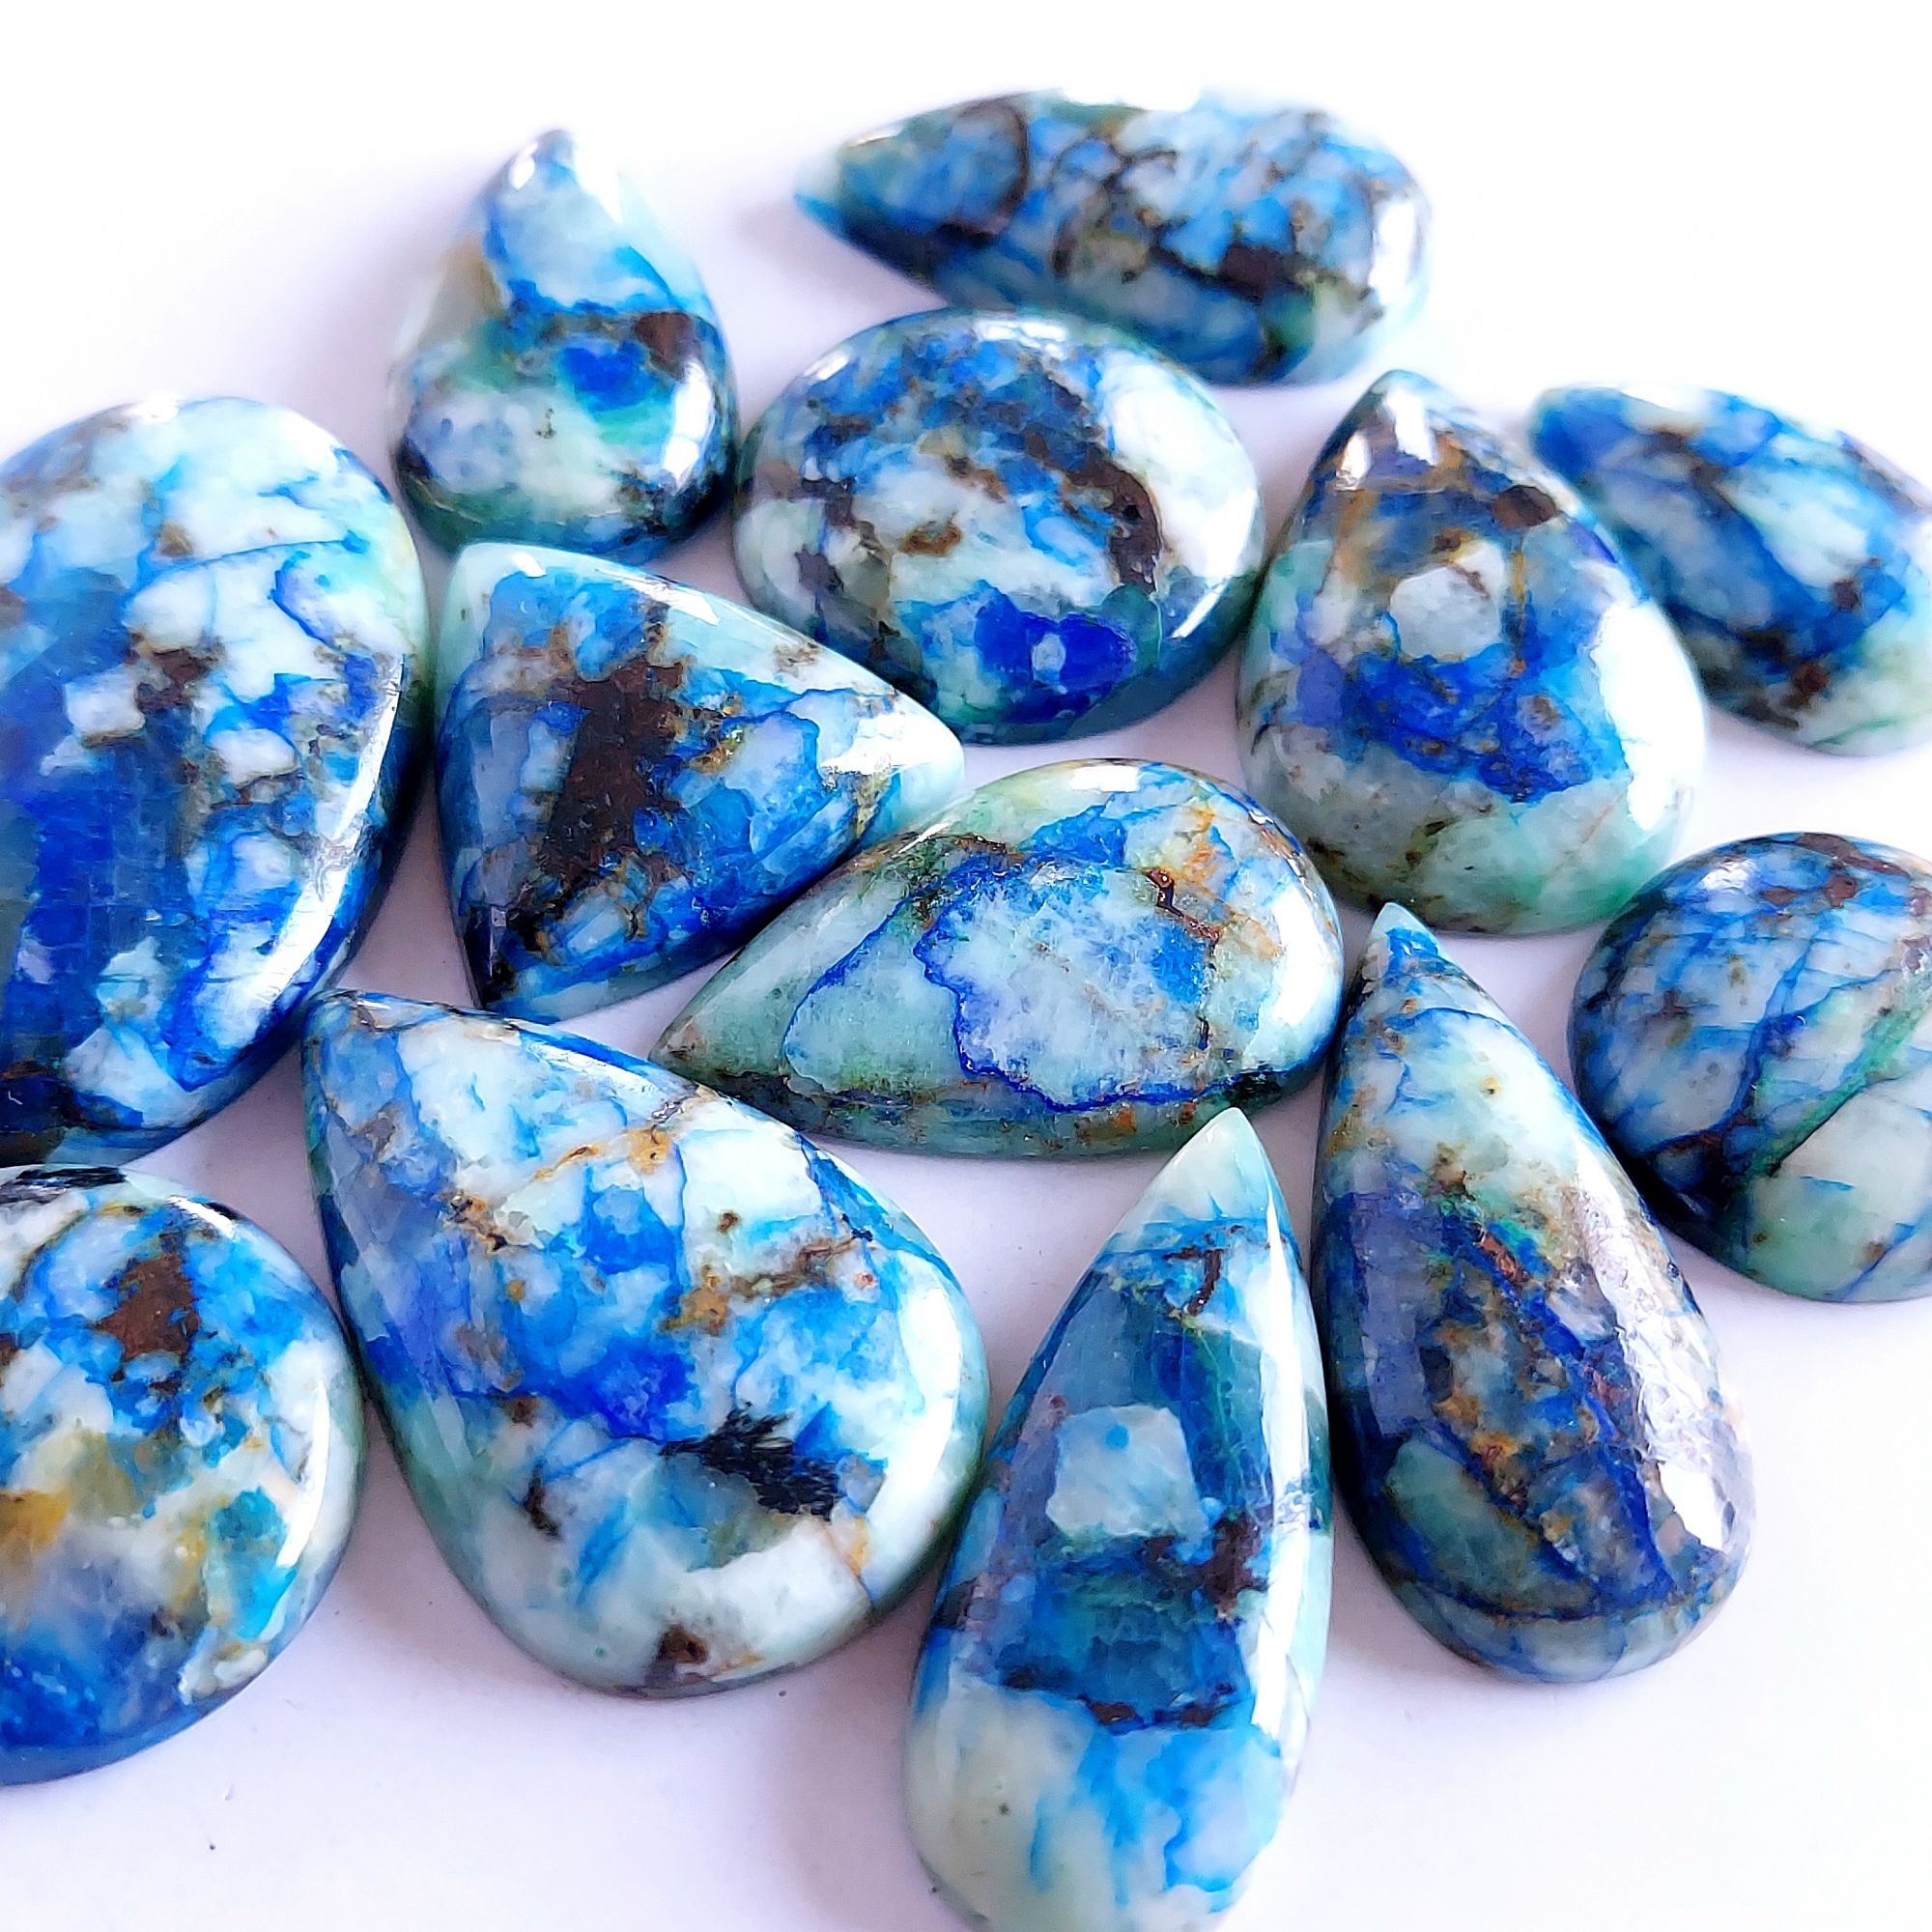 367.Cts 13 Pcs Natural Smooth Azurite Mix Loose Gemstone Cabochon Lot Size 38x24 22x22mm Wholesale Gemstone For jewelry